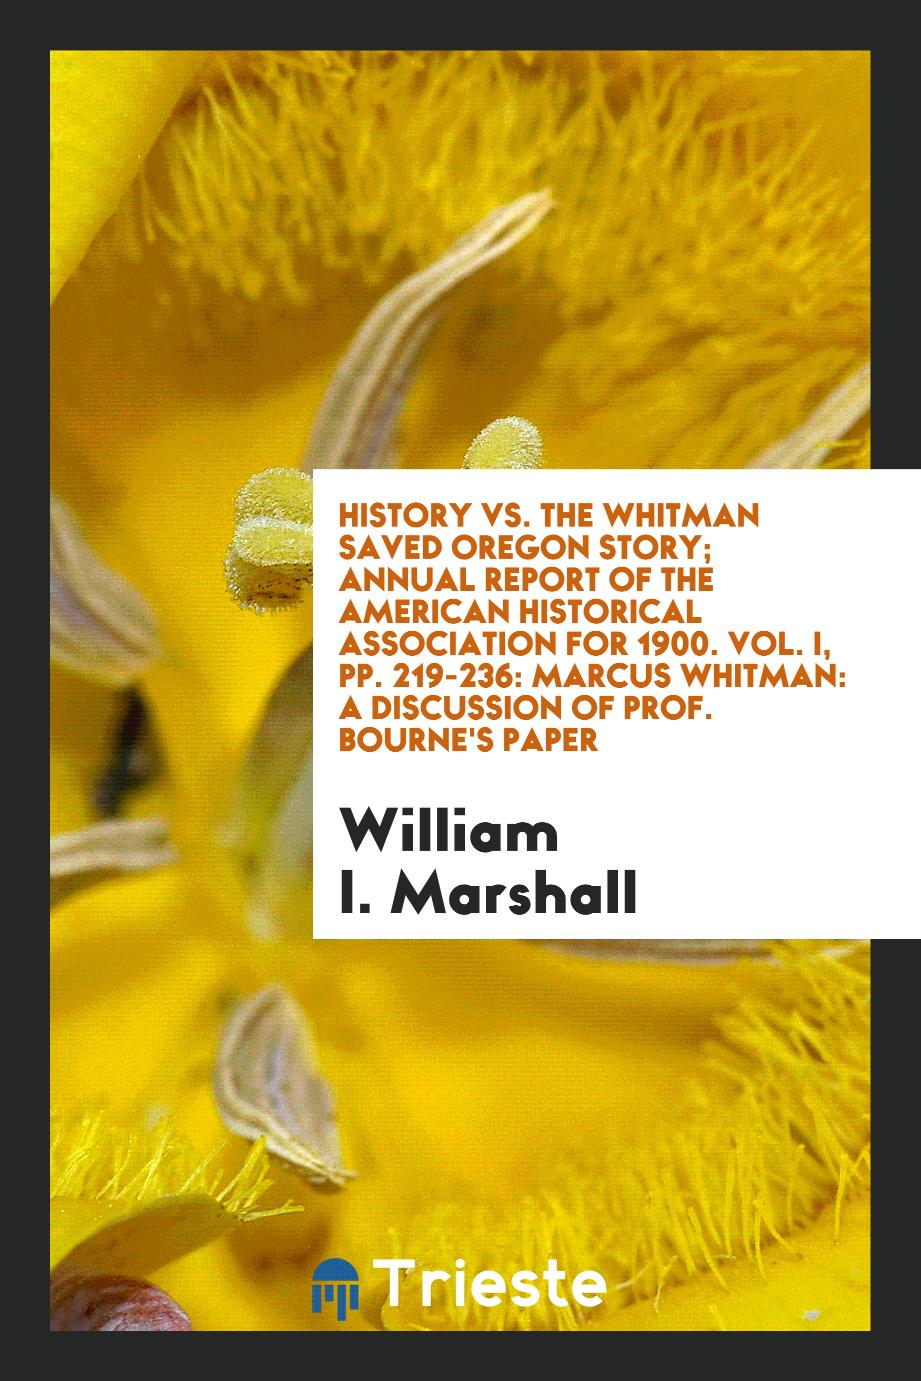 History Vs. the Whitman Saved Oregon Story; Annual Report of the American Historical Association for 1900. Vol. I, pp. 219-236: Marcus Whitman: A Discussion of Prof. Bourne's Paper